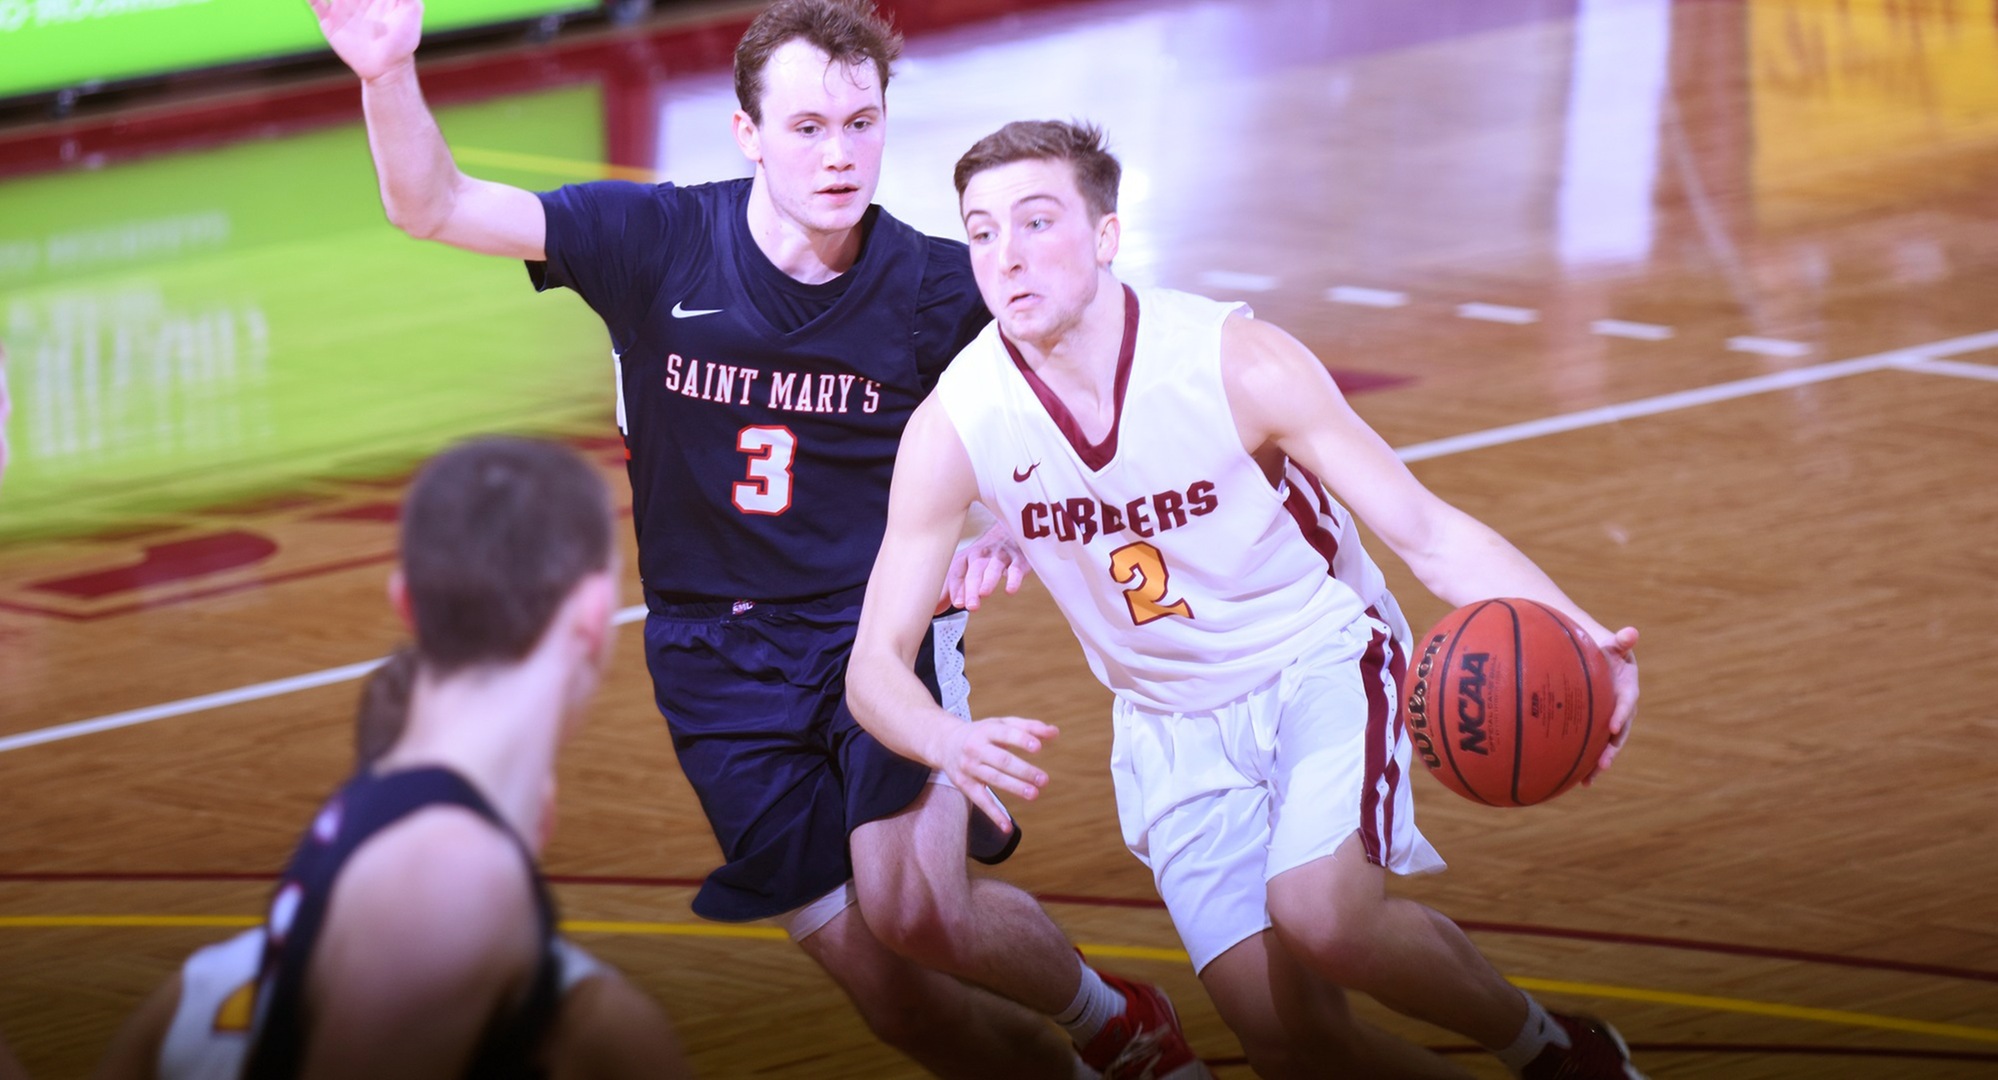 Junior Bryden Urie had a game-high 18 points in the Cobbers' conference road game at St. Mary's.